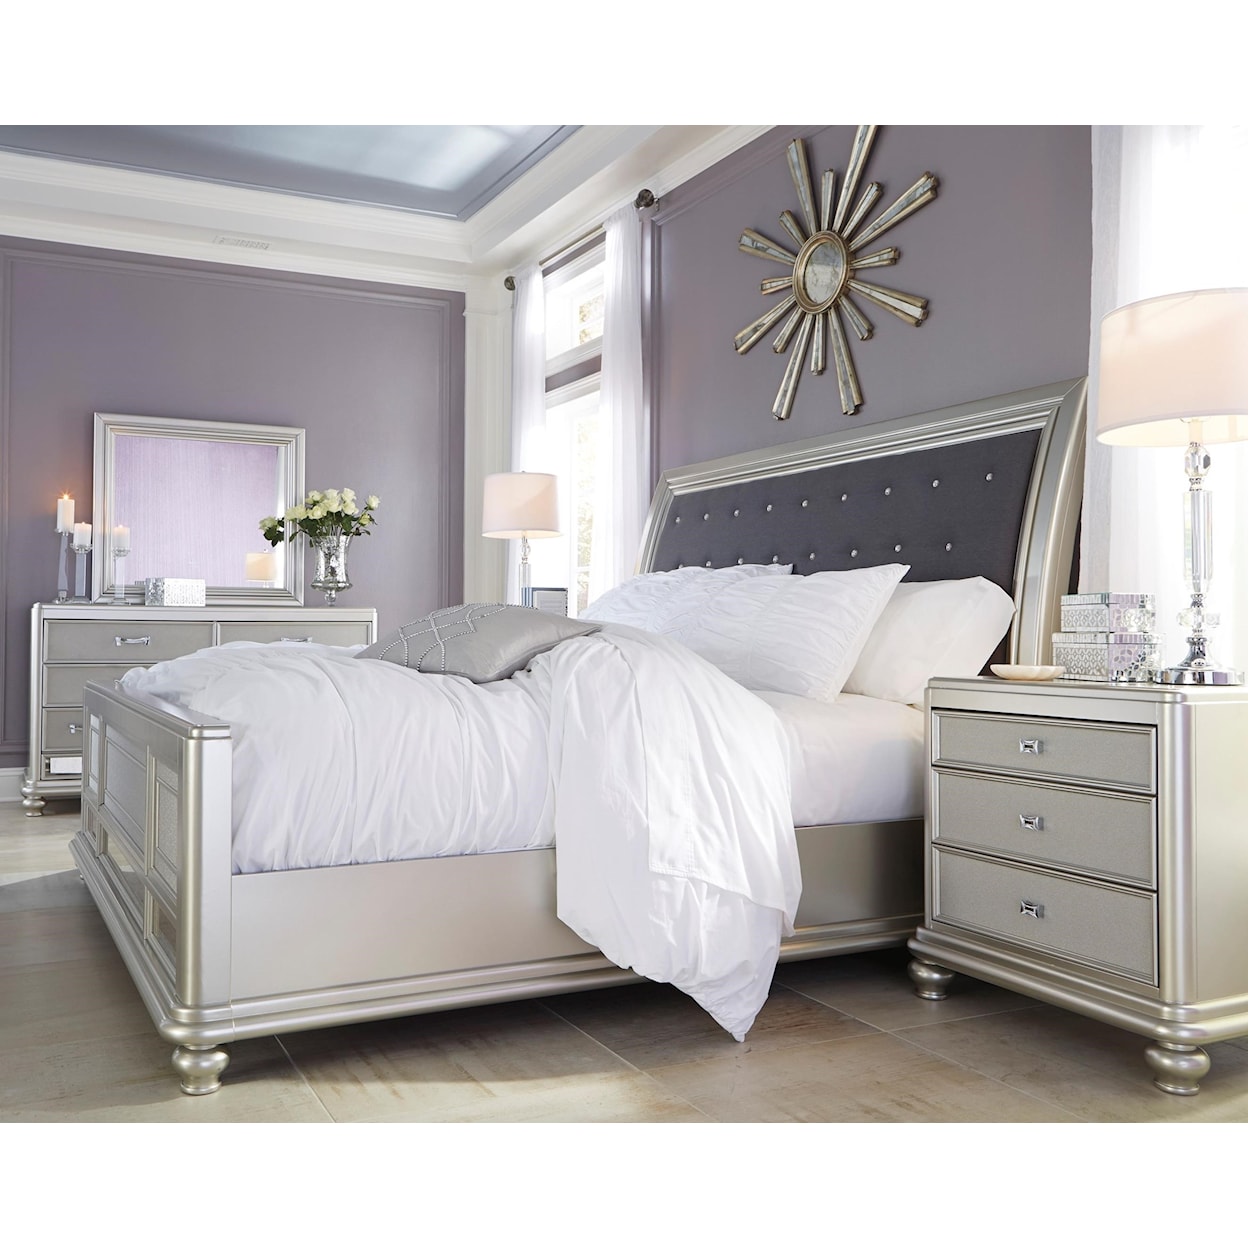 Signature Design by Ashley Coralayne Queen Bedroom Group